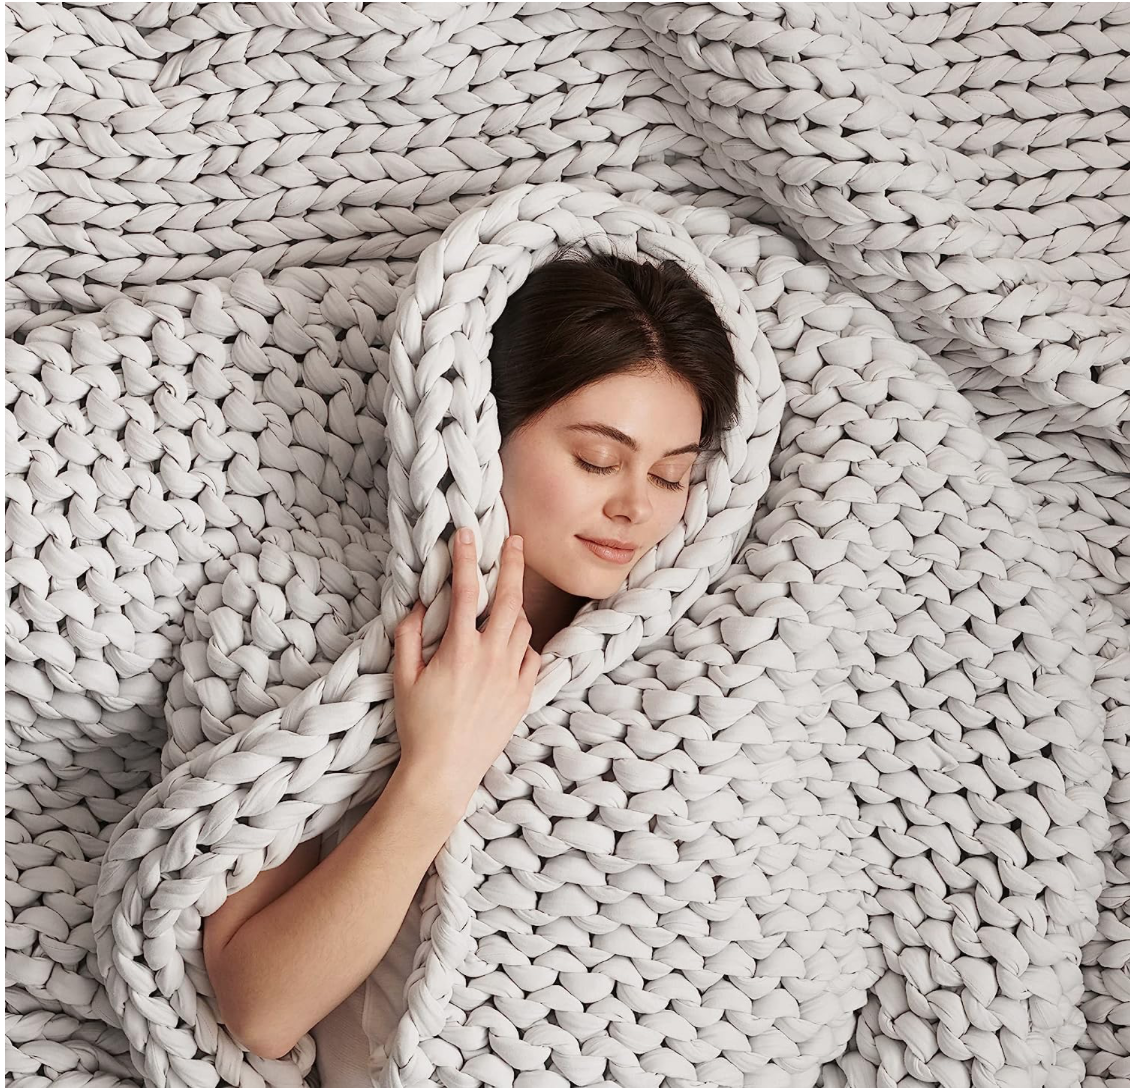 Bearaby Napper Organic Hand-Knit Weighted Blanket for Adults - Chunky Knit Blanket